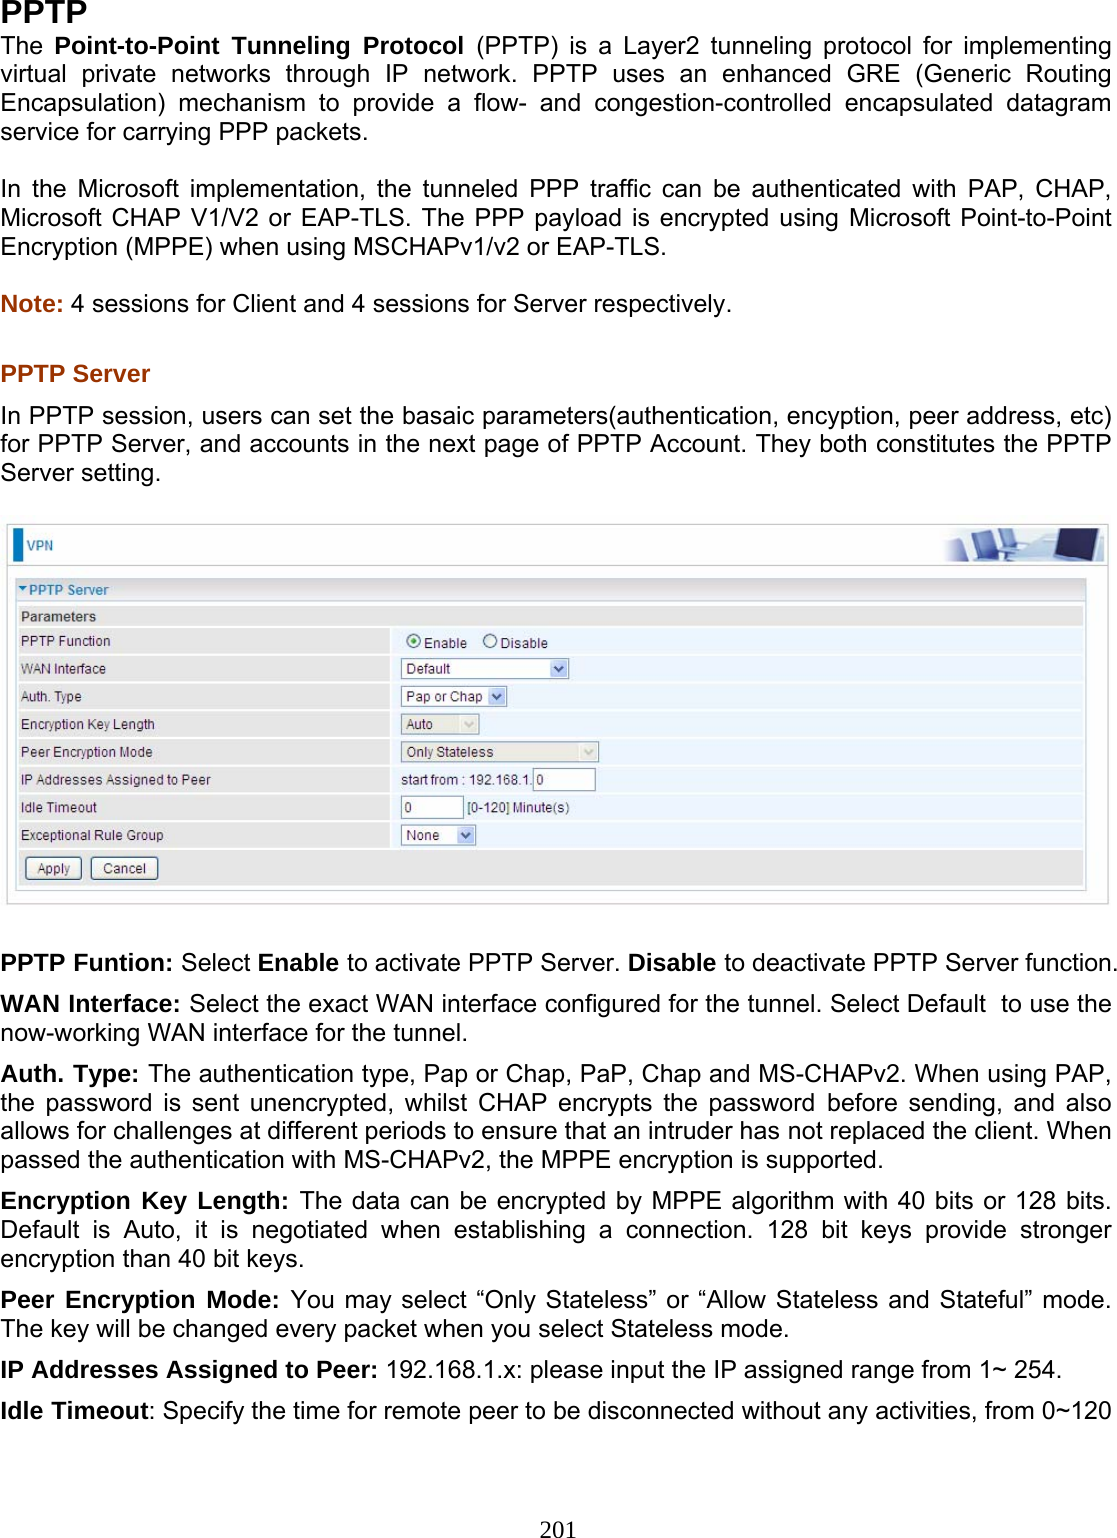 201 PPTP The  Point-to-Point Tunneling Protocol (PPTP) is a Layer2 tunneling protocol for implementing virtual private networks through IP network. PPTP uses an enhanced GRE (Generic Routing Encapsulation) mechanism to provide a flow- and congestion-controlled encapsulated datagram service for carrying PPP packets.   In the Microsoft implementation, the tunneled PPP traffic can be authenticated with PAP,  CHAP, Microsoft CHAP V1/V2 or EAP-TLS. The PPP payload is encrypted using Microsoft Point-to-Point Encryption (MPPE) when using MSCHAPv1/v2 or EAP-TLS.  Note: 4 sessions for Client and 4 sessions for Server respectively.  PPTP Server  In PPTP session, users can set the basaic parameters(authentication, encyption, peer address, etc) for PPTP Server, and accounts in the next page of PPTP Account. They both constitutes the PPTP Server setting.    PPTP Funtion: Select Enable to activate PPTP Server. Disable to deactivate PPTP Server function. WAN Interface: Select the exact WAN interface configured for the tunnel. Select Default  to use the now-working WAN interface for the tunnel. Auth. Type: The authentication type, Pap or Chap, PaP, Chap and MS-CHAPv2. When using PAP, the password is sent unencrypted, whilst CHAP encrypts the password before sending, and also allows for challenges at different periods to ensure that an intruder has not replaced the client. When passed the authentication with MS-CHAPv2, the MPPE encryption is supported. Encryption Key Length: The data can be encrypted by MPPE algorithm with 40 bits or 128 bits. Default is Auto, it is negotiated when establishing a connection. 128 bit keys provide stronger encryption than 40 bit keys. Peer Encryption Mode: You may select “Only Stateless” or “Allow Stateless and Stateful” mode. The key will be changed every packet when you select Stateless mode.  IP Addresses Assigned to Peer: 192.168.1.x: please input the IP assigned range from 1~ 254.  Idle Timeout: Specify the time for remote peer to be disconnected without any activities, from 0~120 